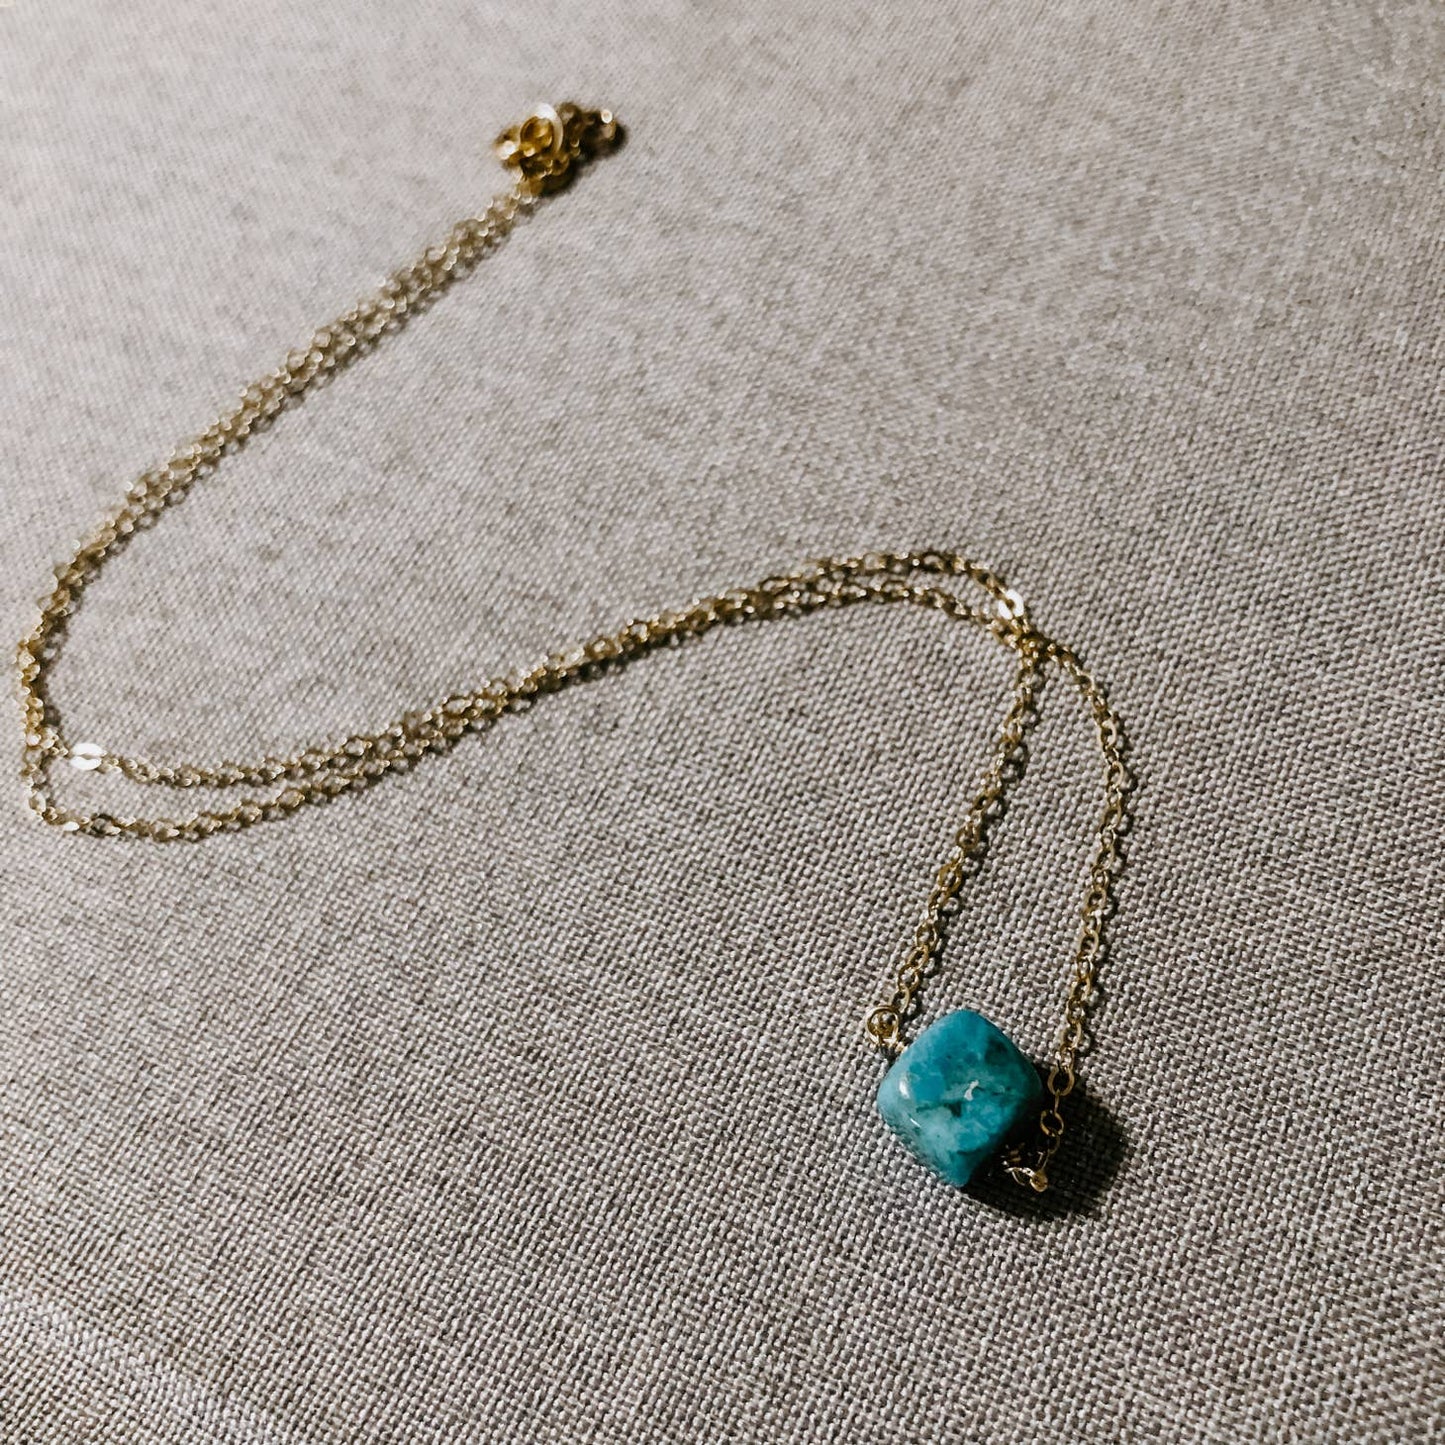 Turquoise Choker Necklace